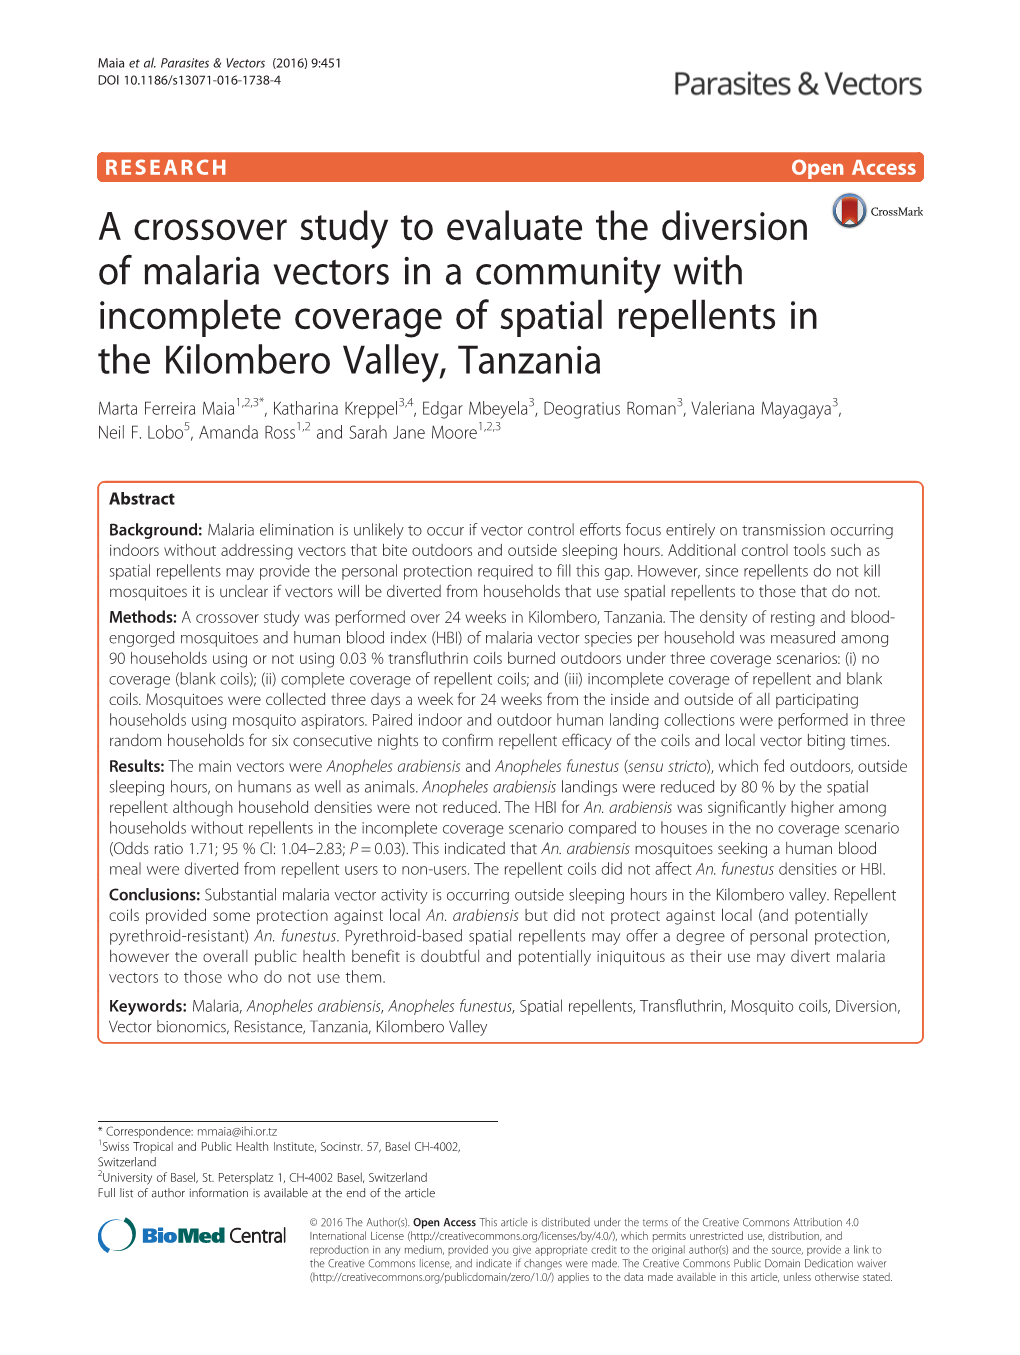 A Crossover Study to Evaluate the Diversion of Malaria Vectors in A